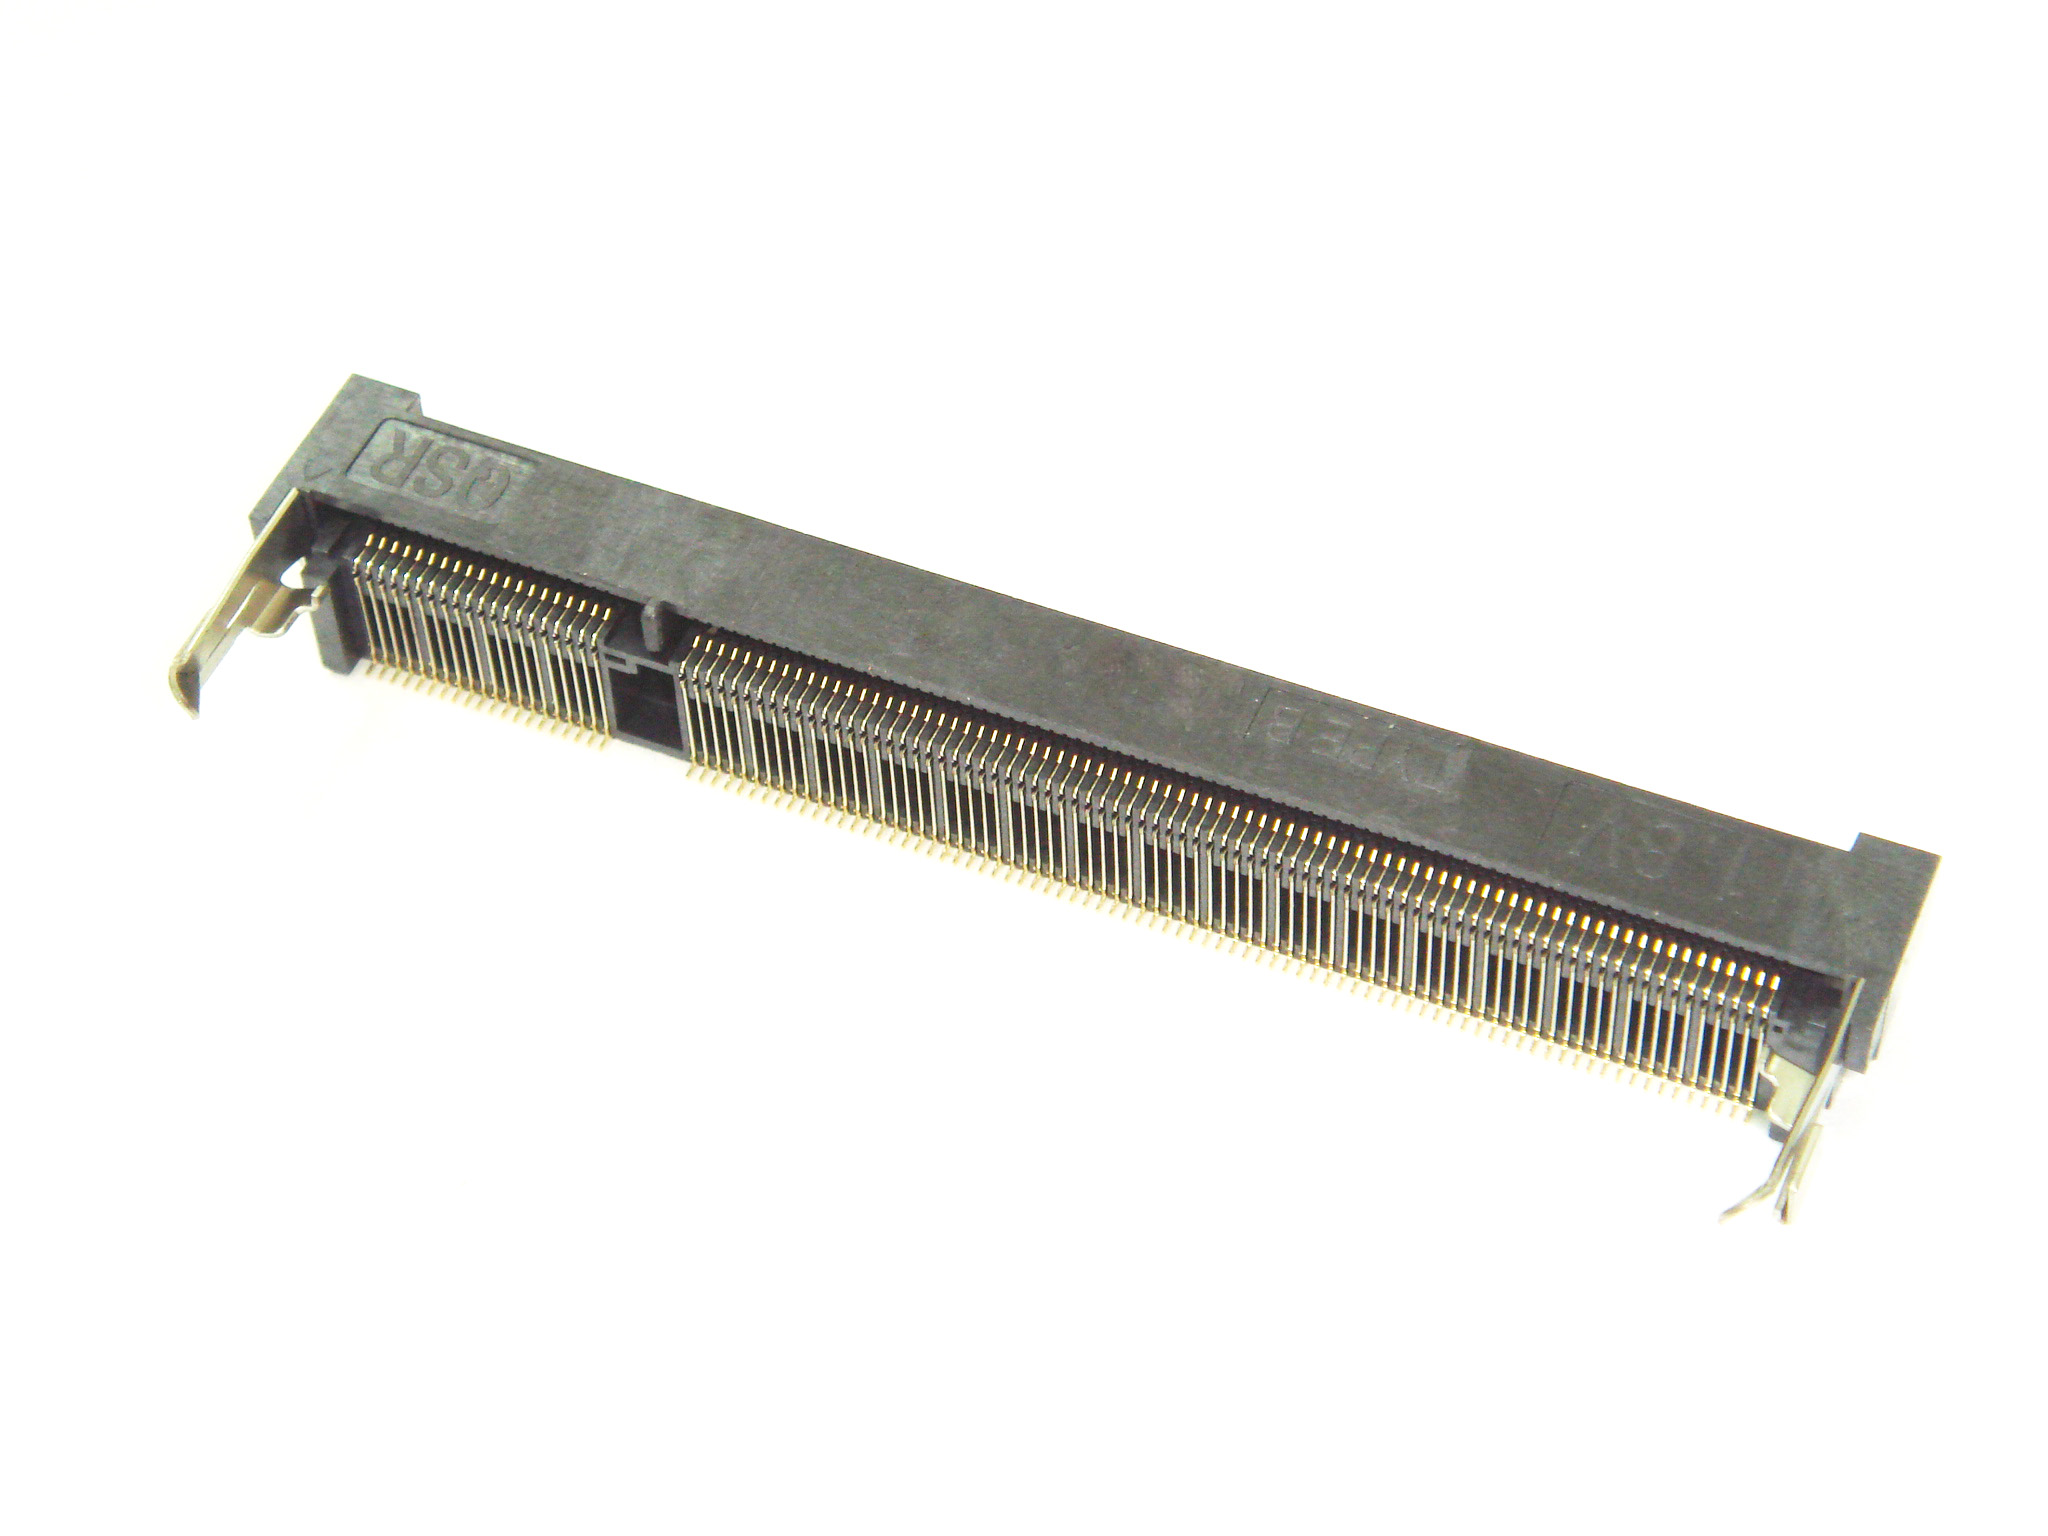 S.O.DIMM DDR2 SOCKET 9.2H REVERSE TYPE 1.8V SMALL LATCH